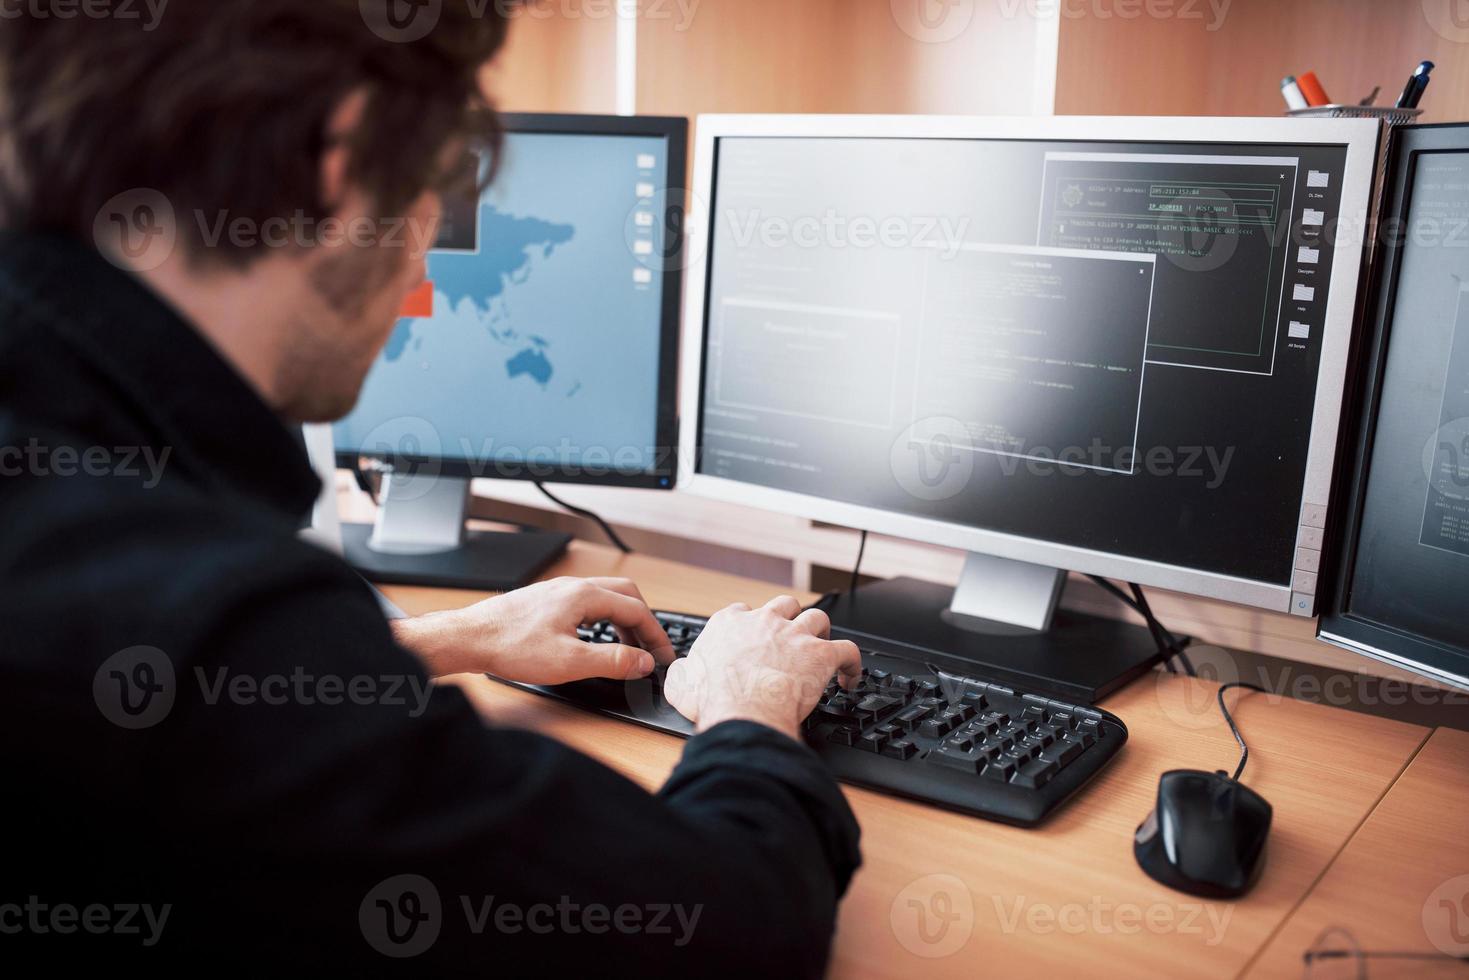 The young dangerous hacker breaks down government services by downloading sensitive data and activating viruses. A man uses a laptop computer with many monitors photo